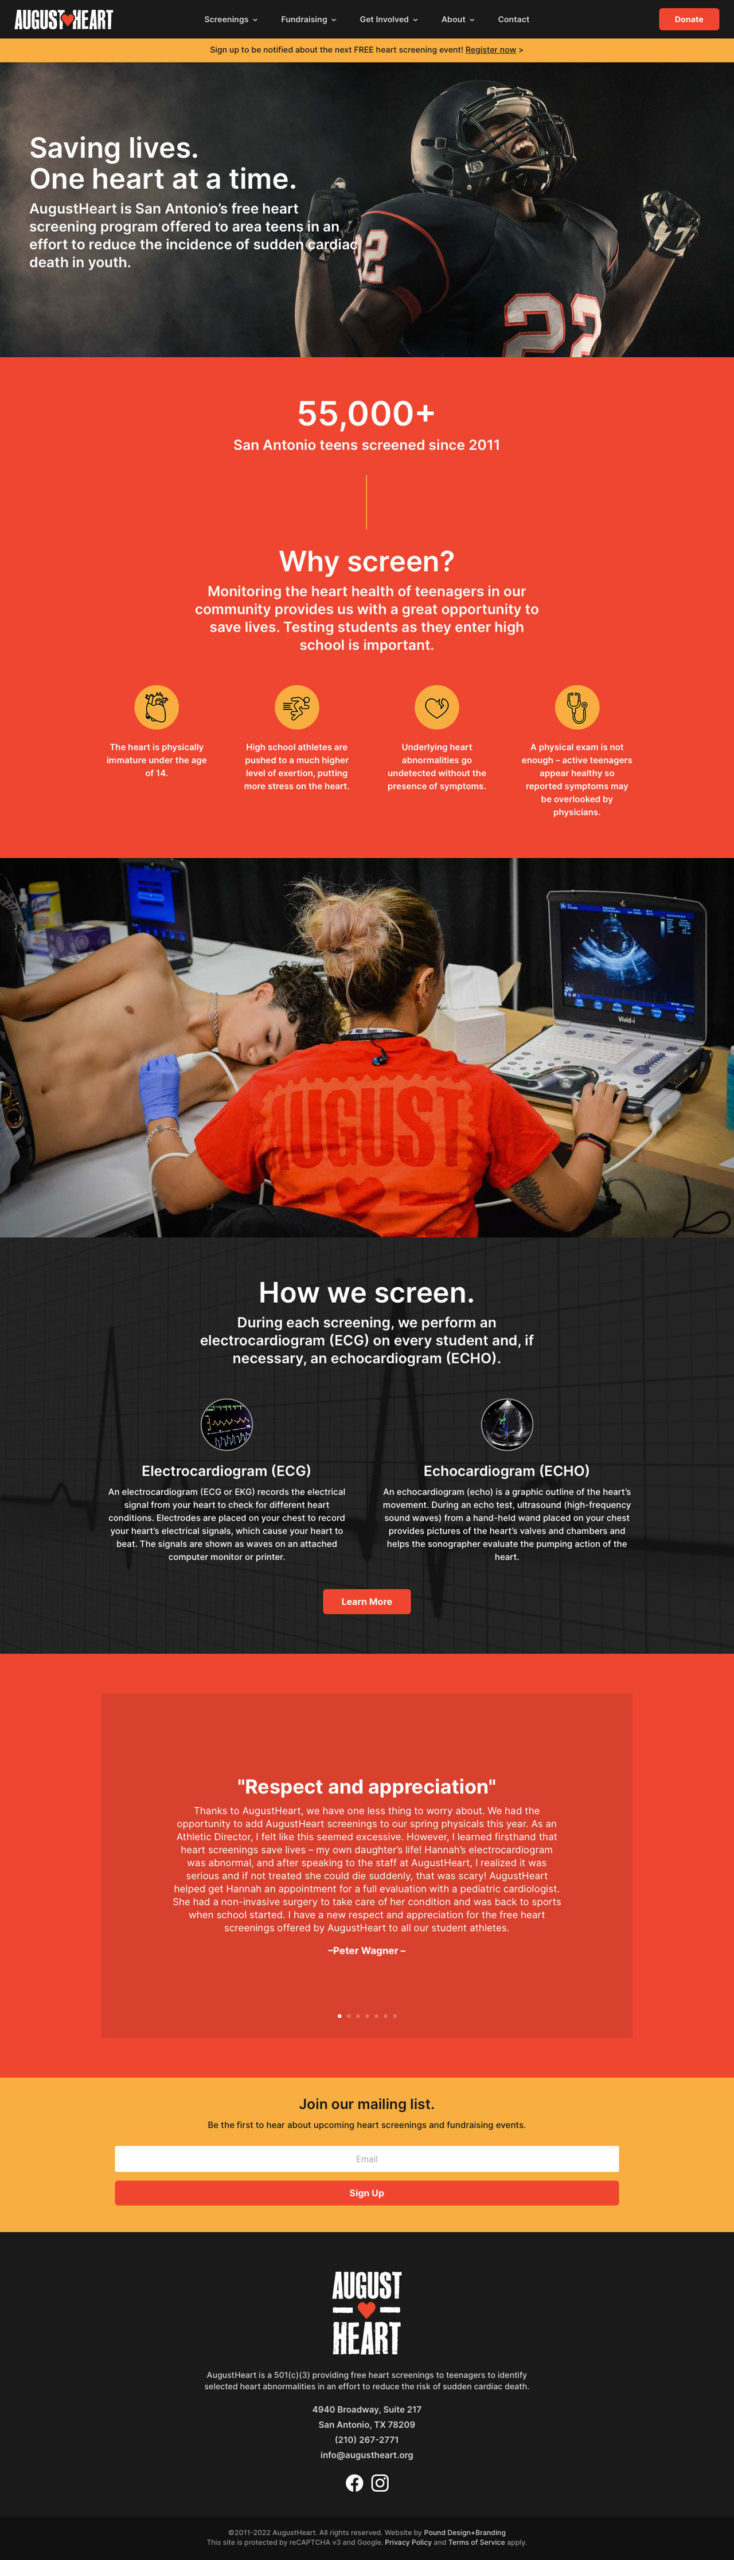 AugustHeart website home page design by Pound Design